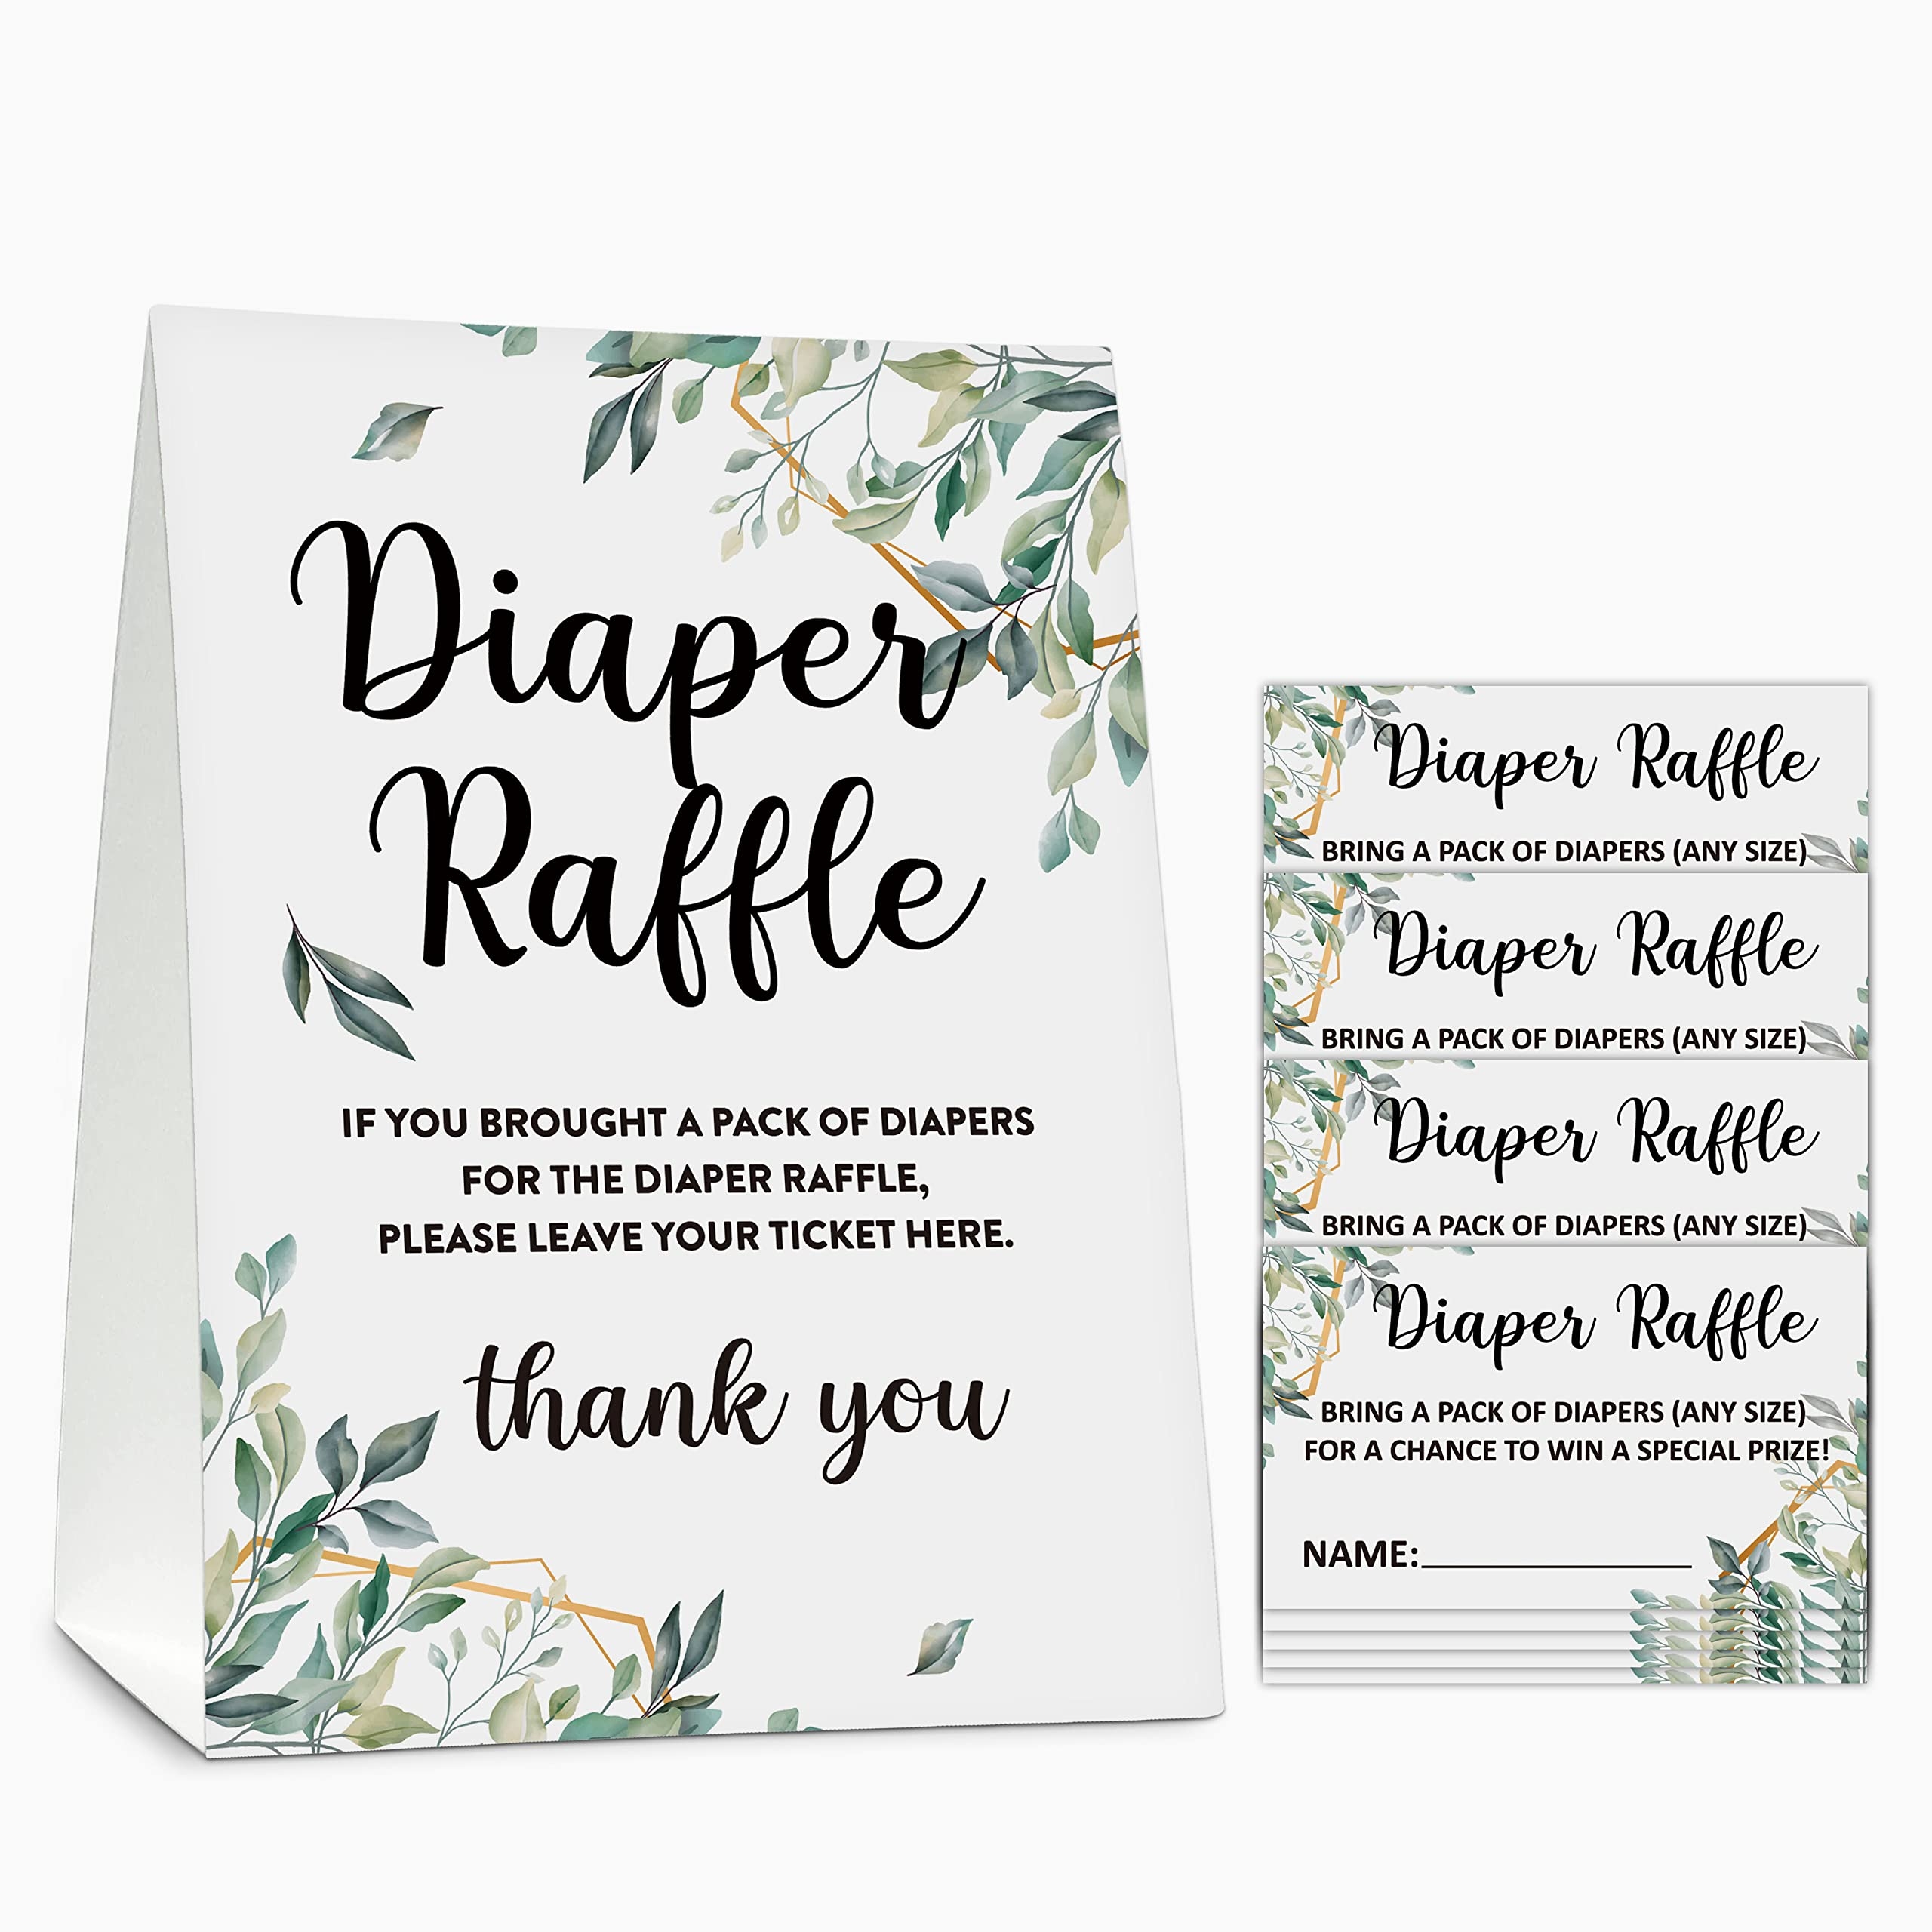 Amazon Diaper Raffle Baby Shower Game Set 1 Standing Sign 50 Guessing Cards Greenery Diaper Raffle Tickets For Baby Shower Gold Foil Baby Shower Party Favor Decor A04 Home Kitchen - Diaper Raffle Template Free Printable